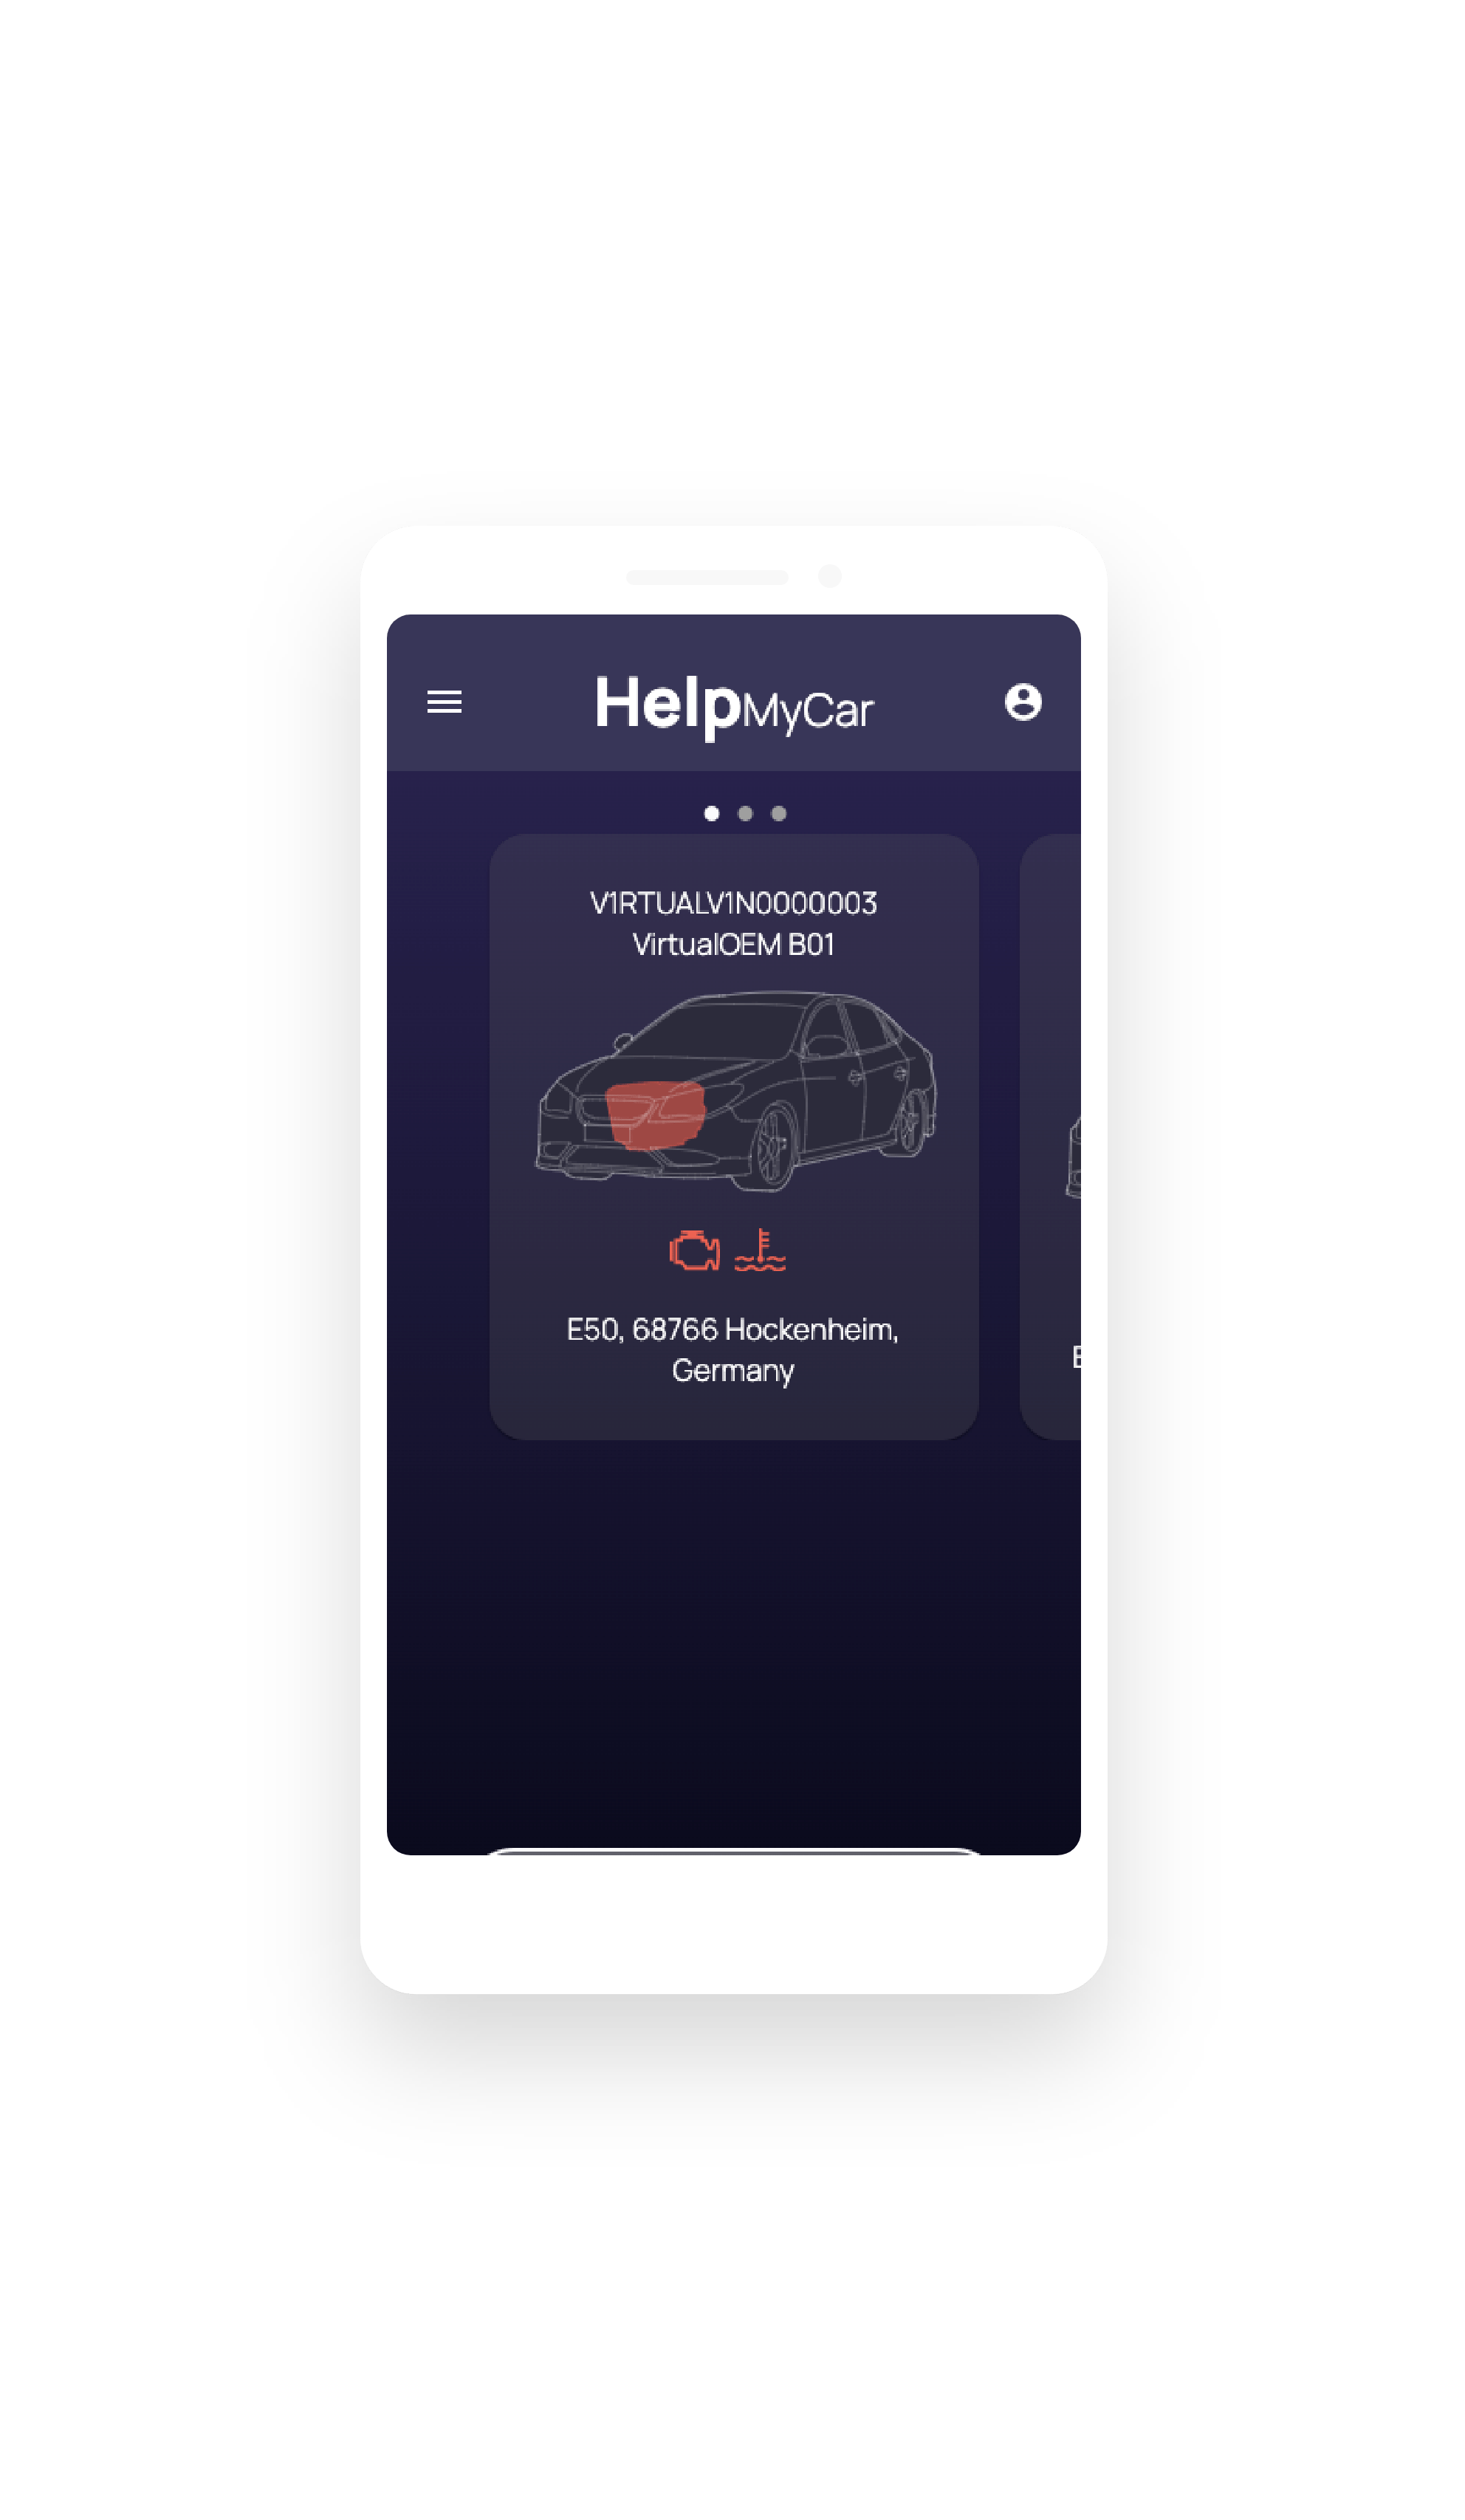 App which Provides Roadside Assistance